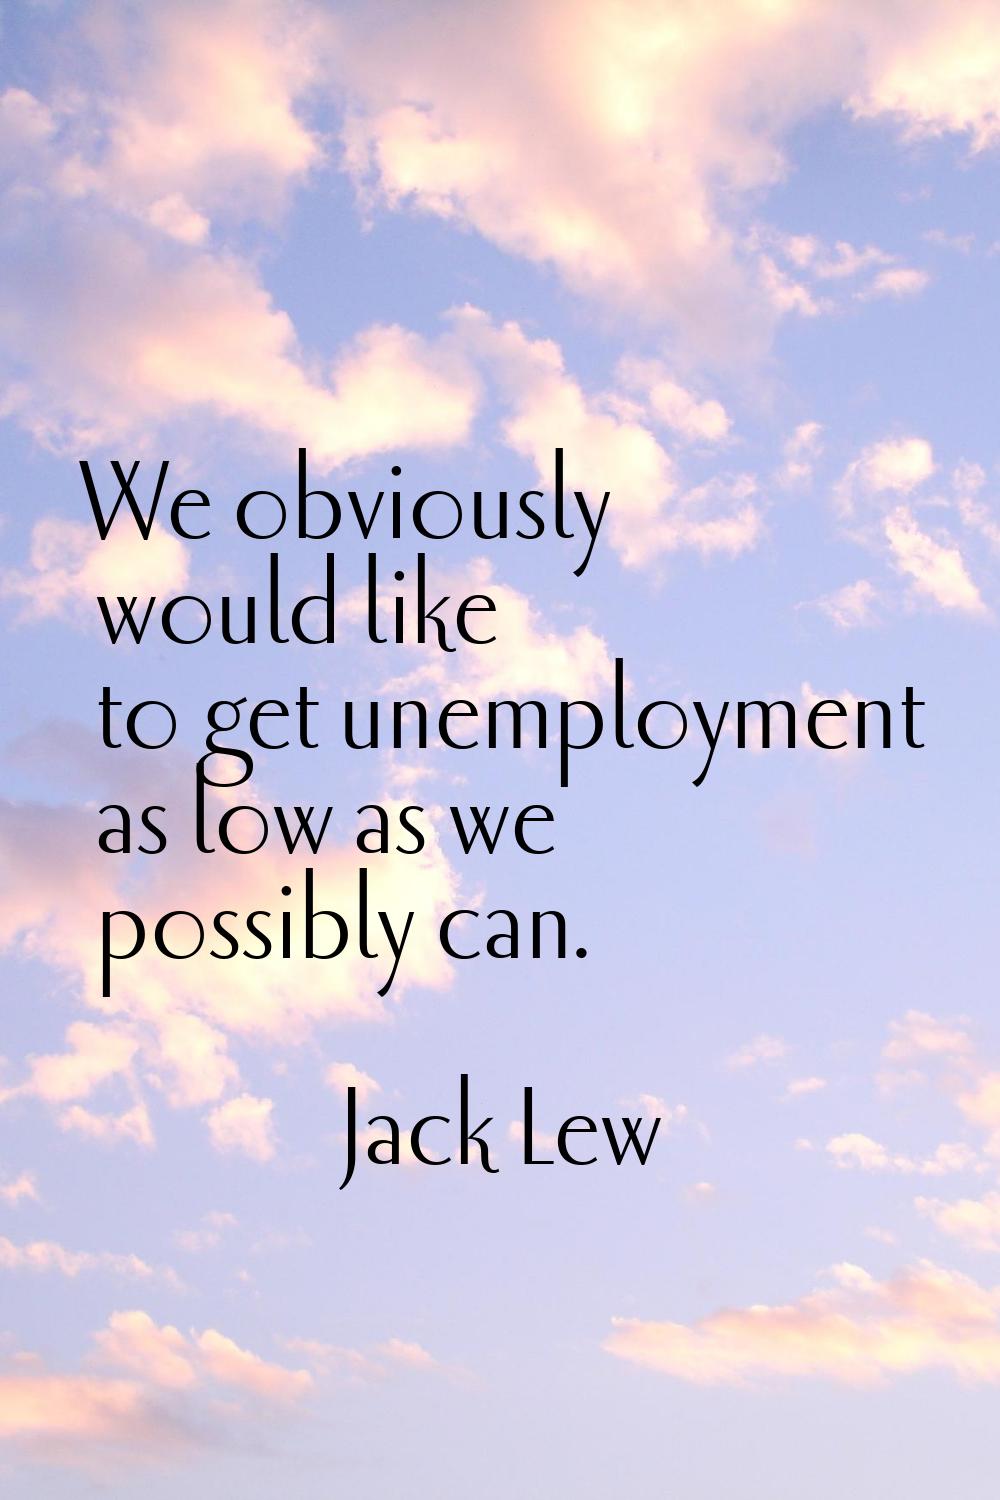 We obviously would like to get unemployment as low as we possibly can.